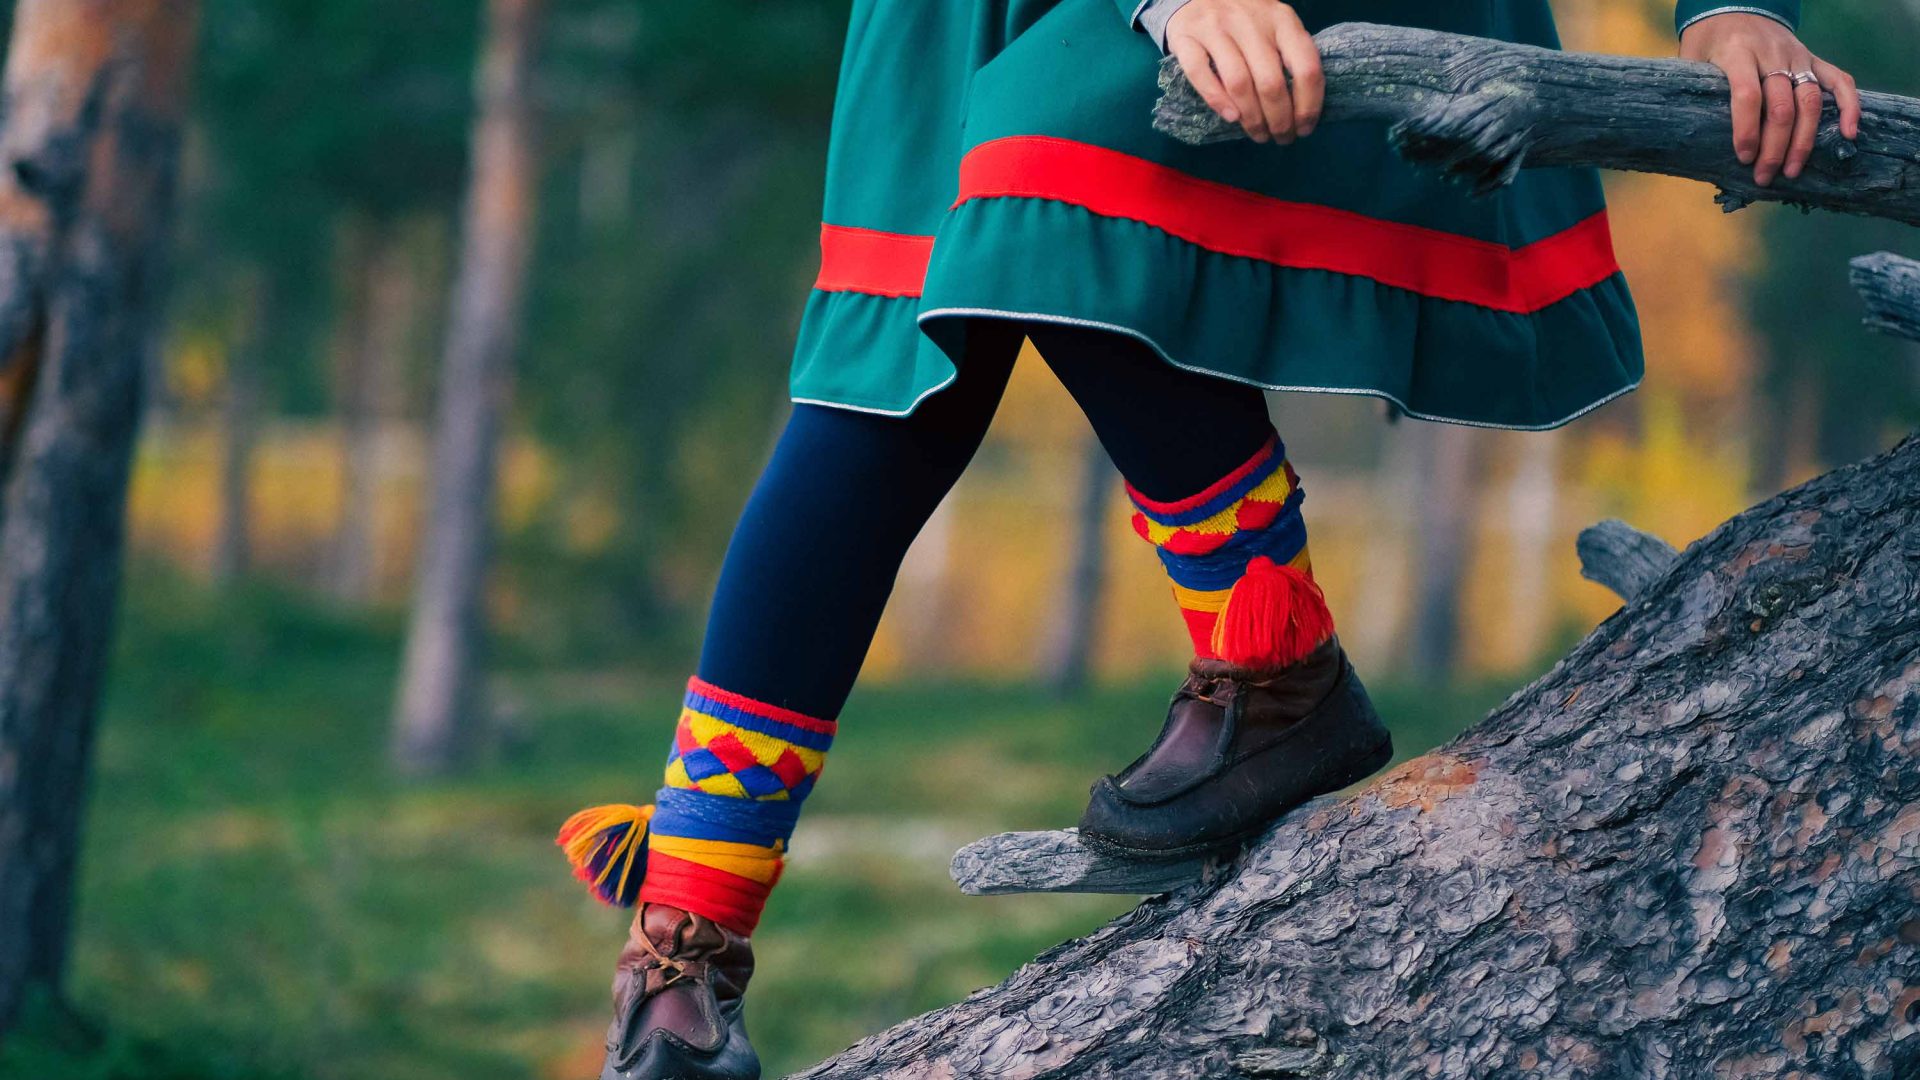 The legs of a woman in Sami designs climbs on a tree.